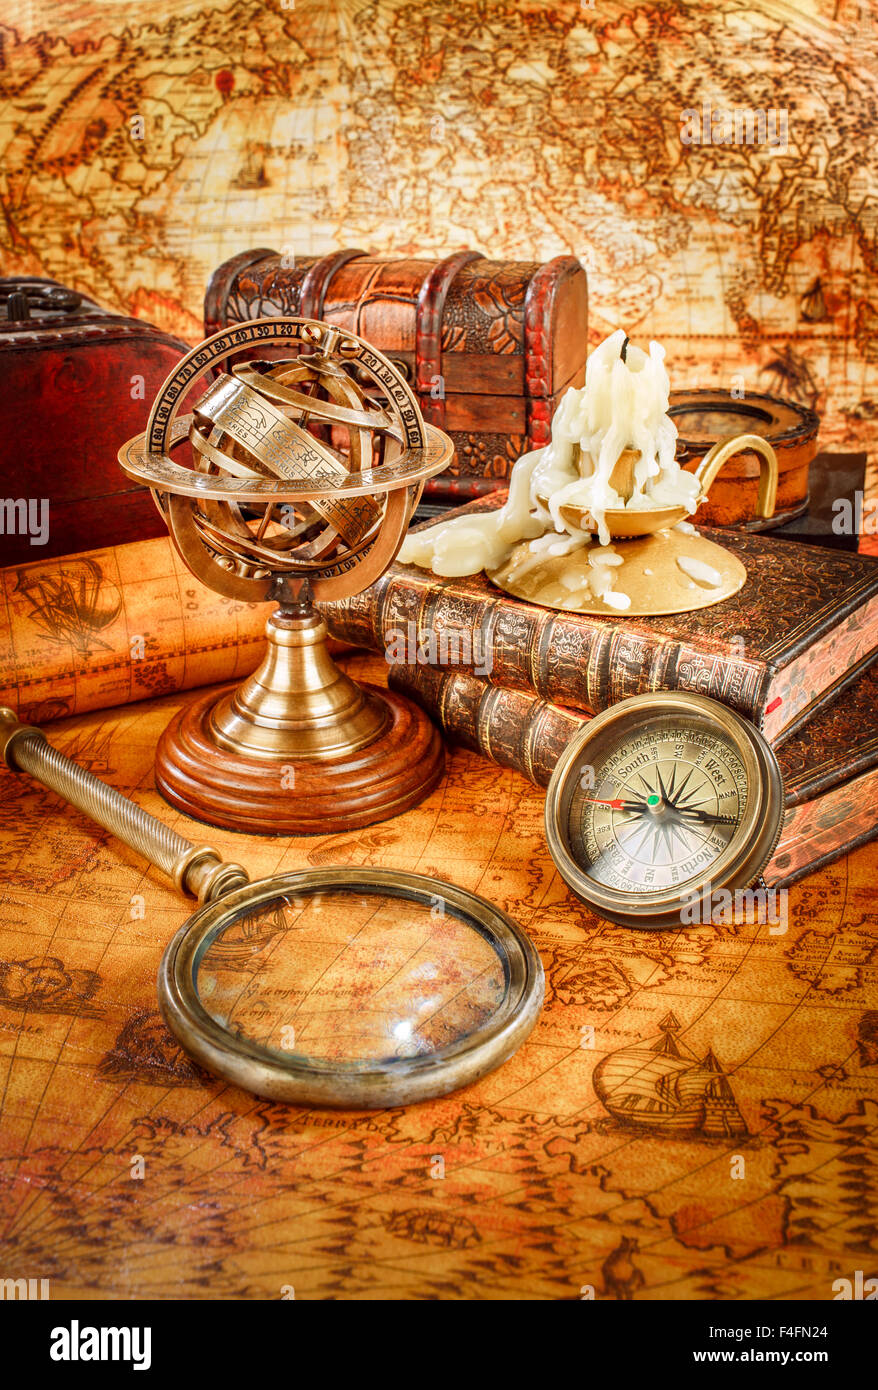 Vintage still life. Vintage magnifying glass lies, pocket watch, old book and armillary sphere on an ancient world map in 1565. Stock Photo